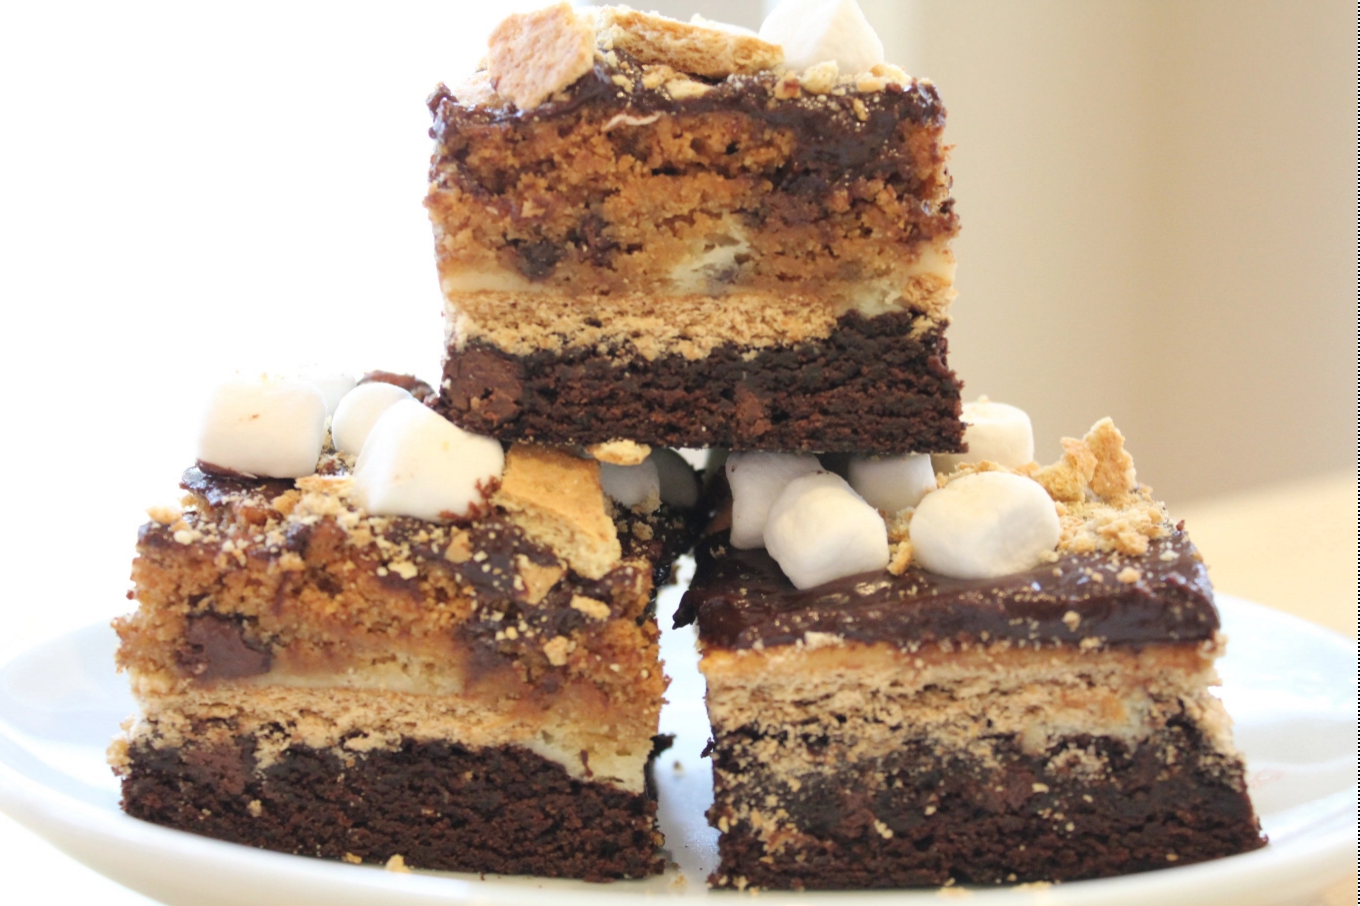 12 S'mores Recipes for National S'mores Day!!! Celebrate one of the best food holidays ever! Make s'mores at home, in your oven, at a camp fire, make s'mores brownies, cupcakes or even a s'mores mud pie! The possibilities are endless!